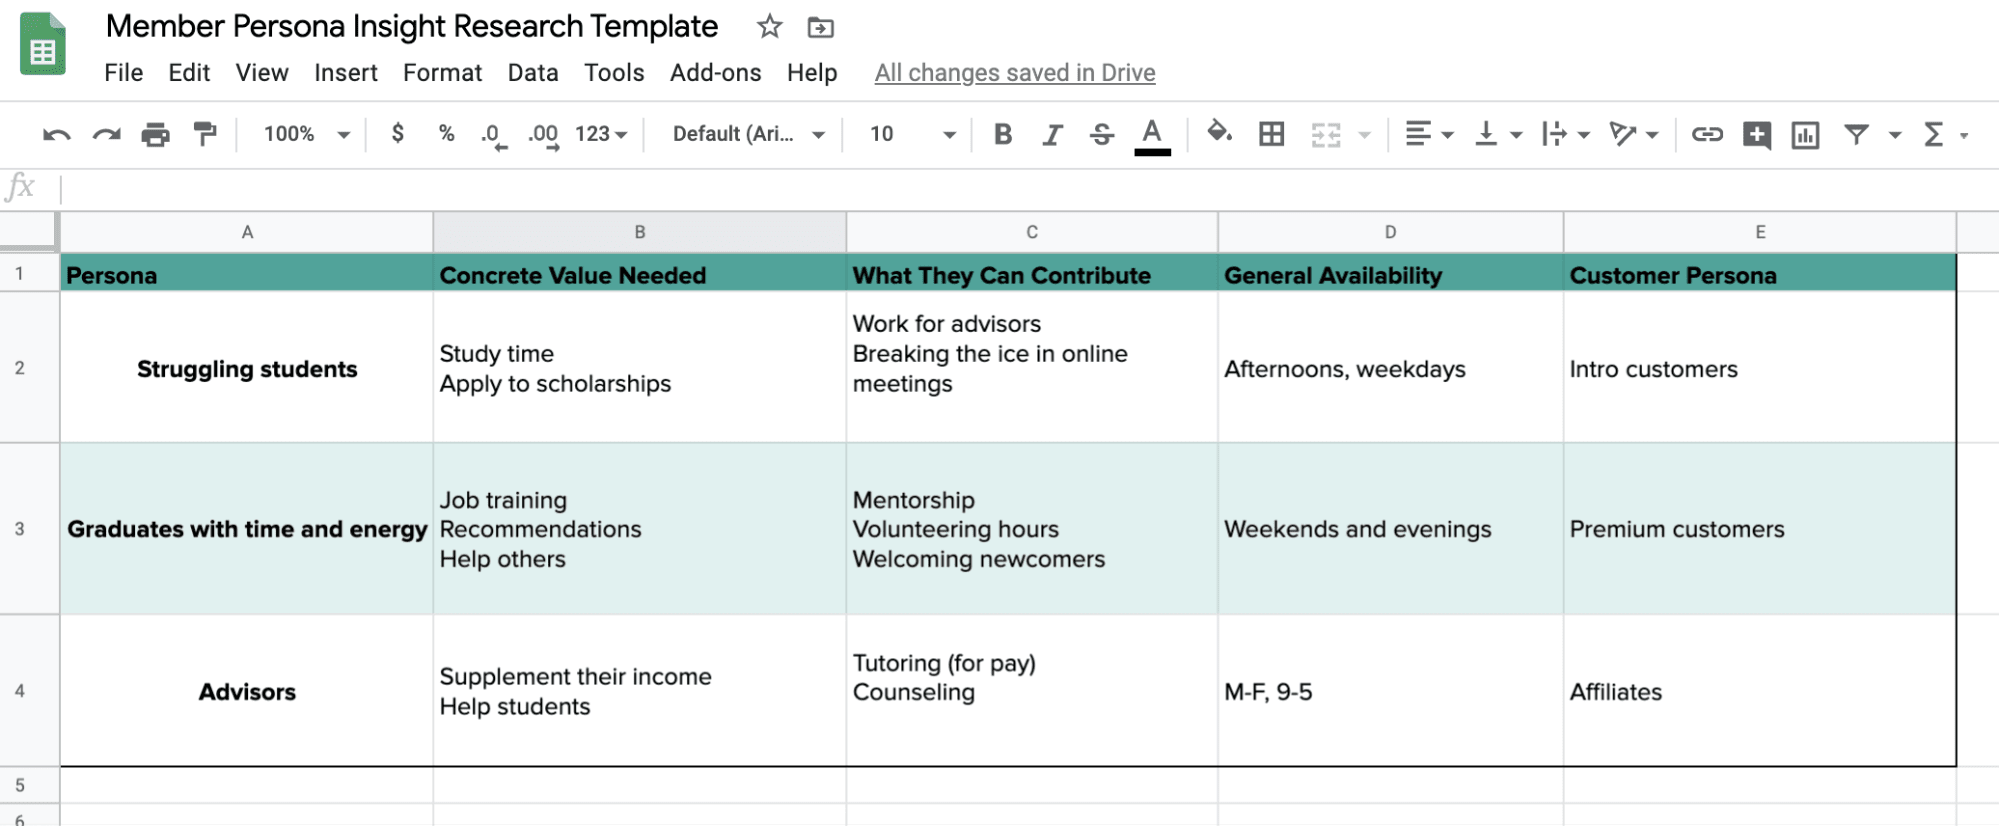 member persona insight research template